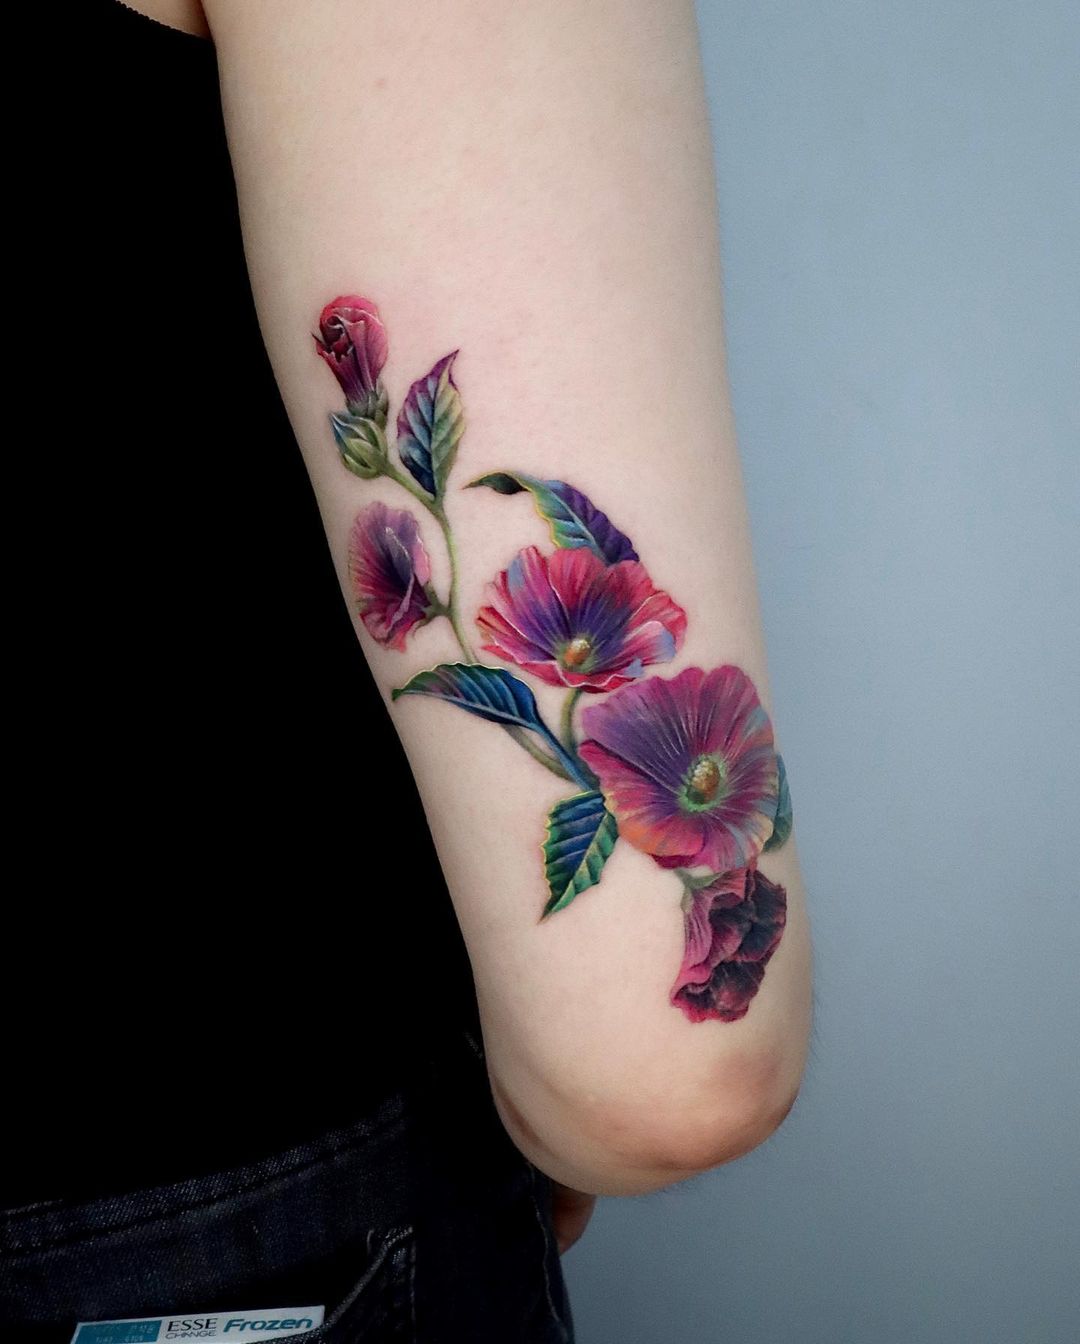 64 Inspiring Flower Tattoos to Come Up with a Great Idea